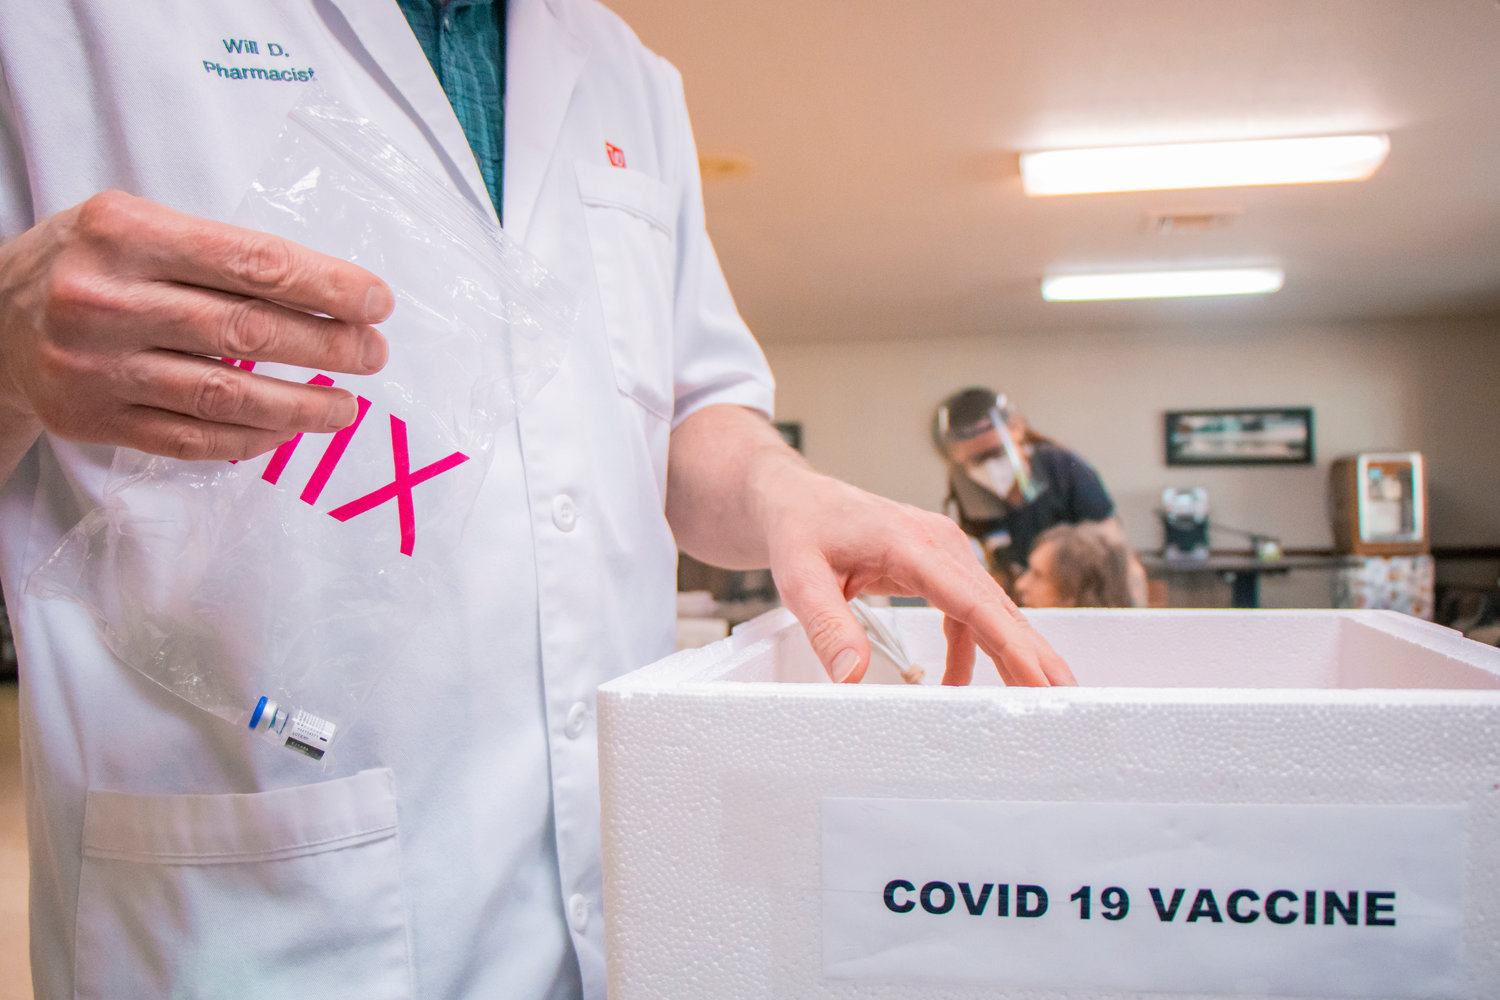 FILE PHOTO — Will Dix, a pharmacist with Walgreens for over 20 years, holds up a bag containing a Pfizer COVID-19 vaccine vile at Prestige Post-Acute and Rehab Center in January.